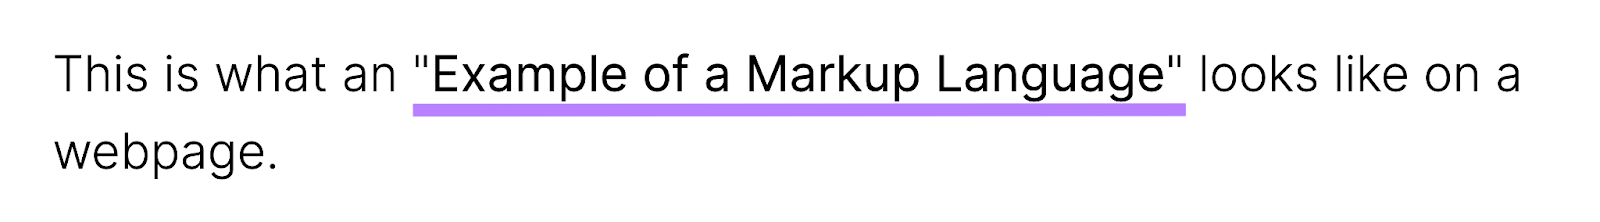 Example of a Markup Language on a webpage